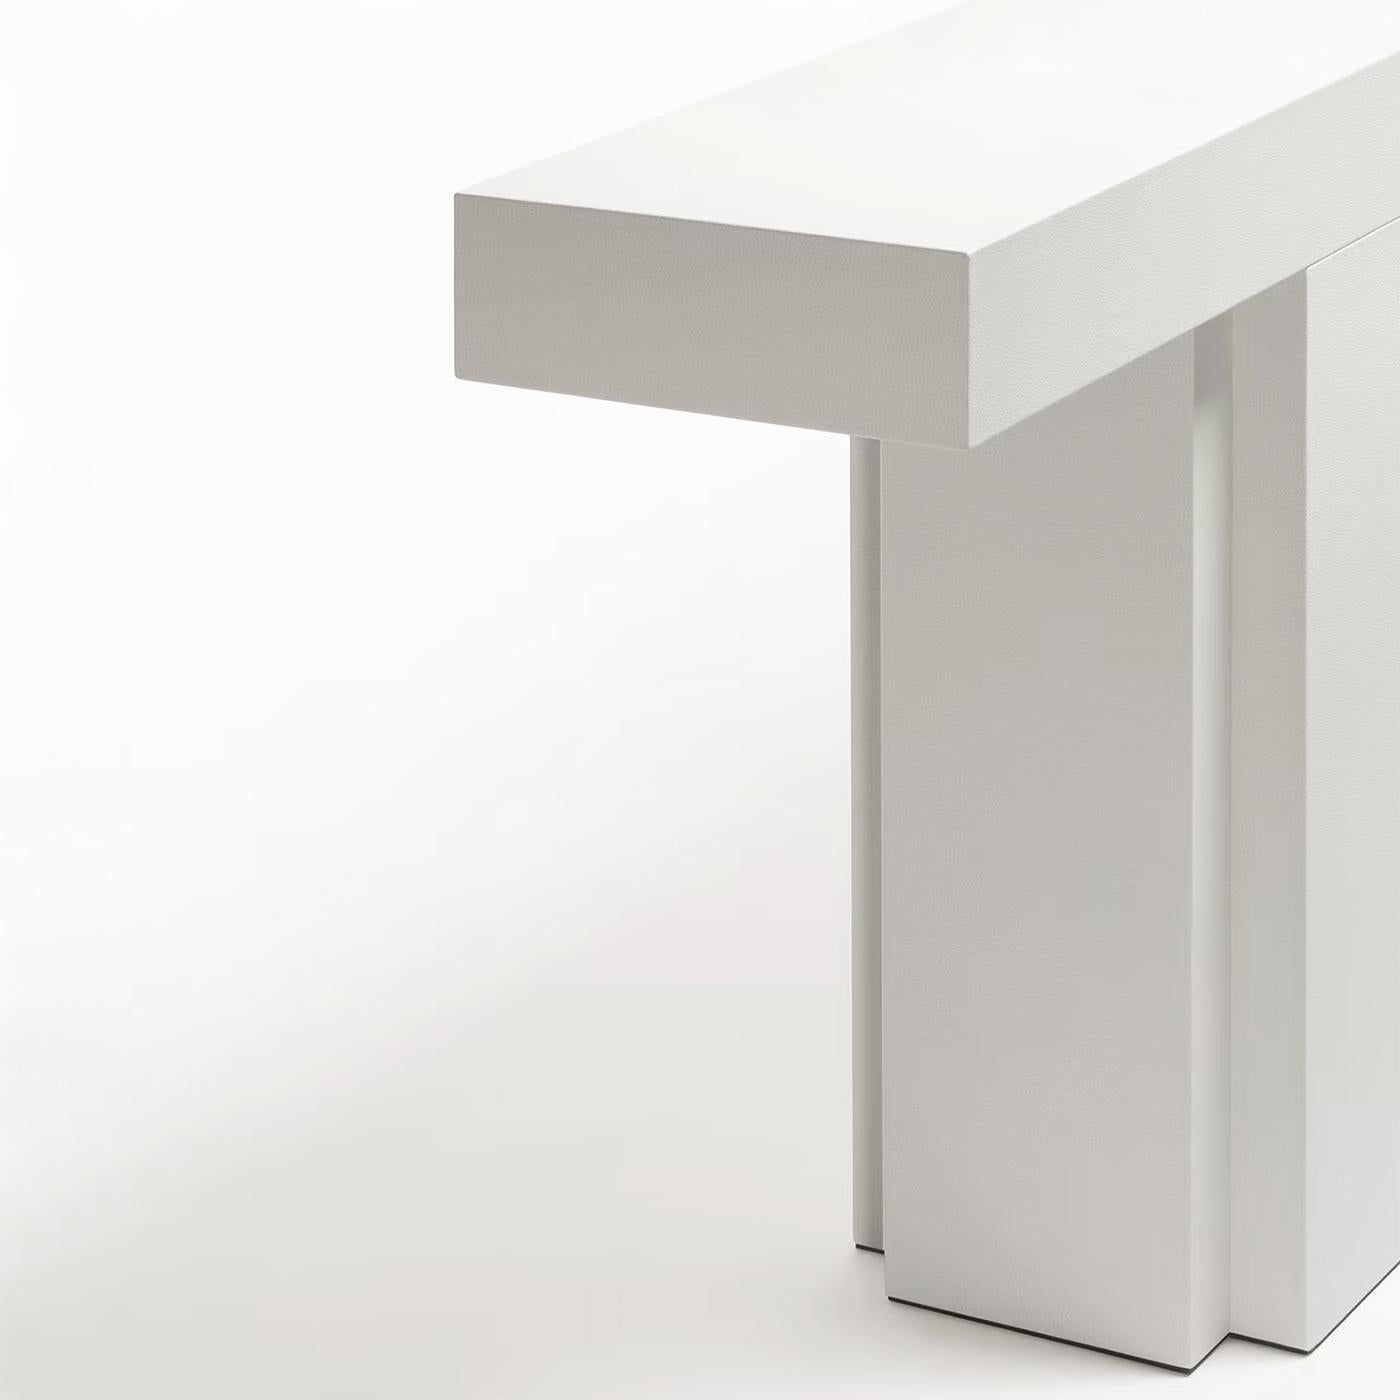 Console Table Absolut Leather with solid wood structure, 
all covered top in genuine leather in white color finish.
Also available in other suede colors on request.